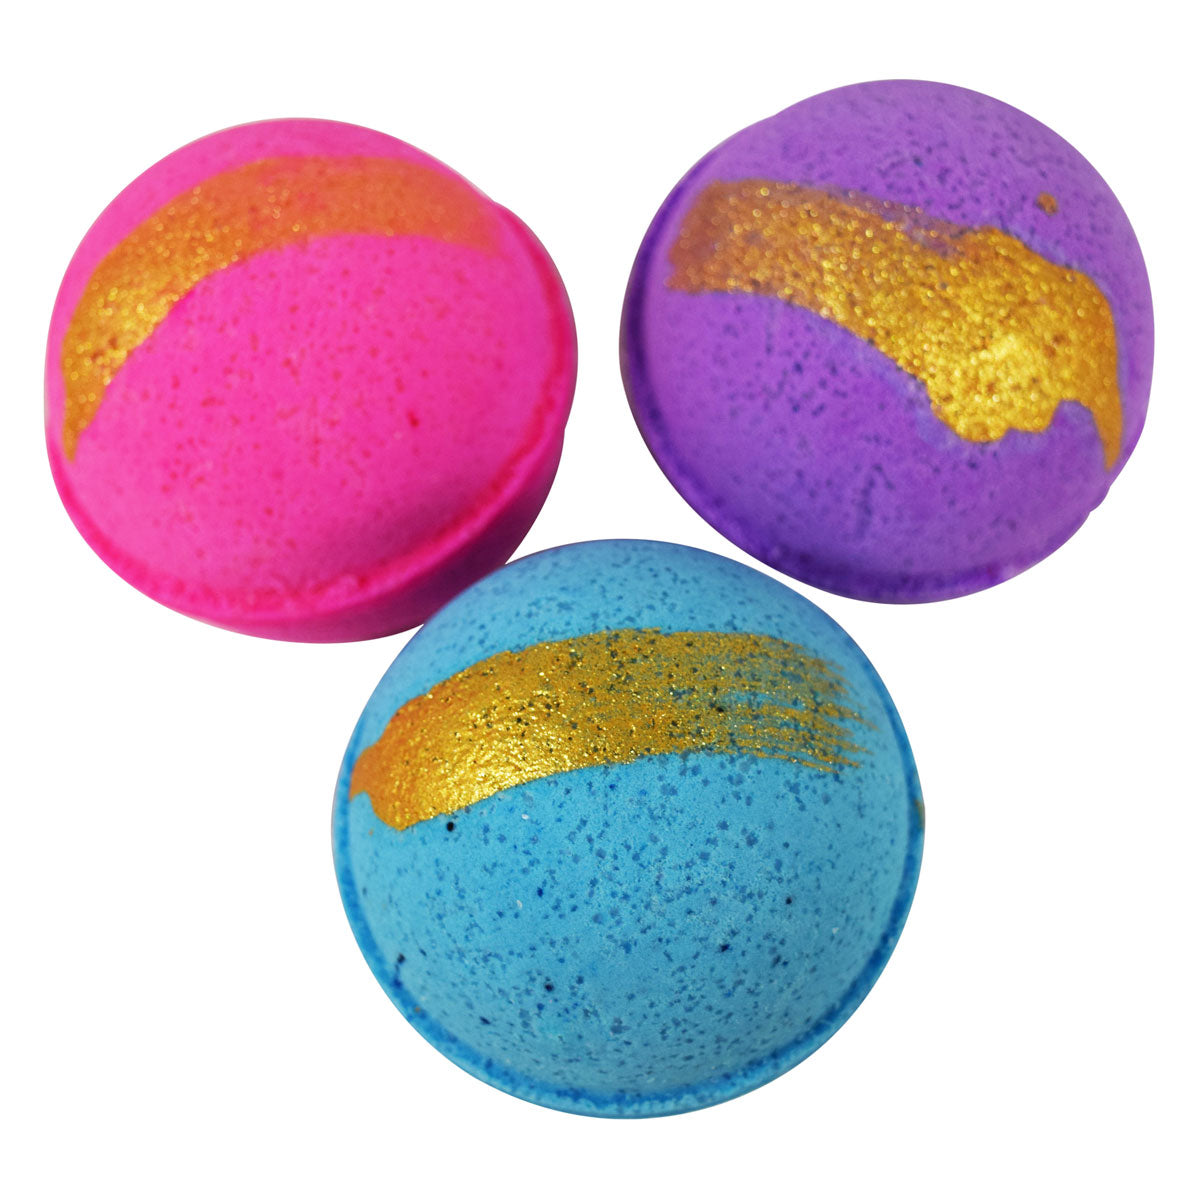 Ultimate Bath Bombs 4.5 oz - Pure Goat Soapworks